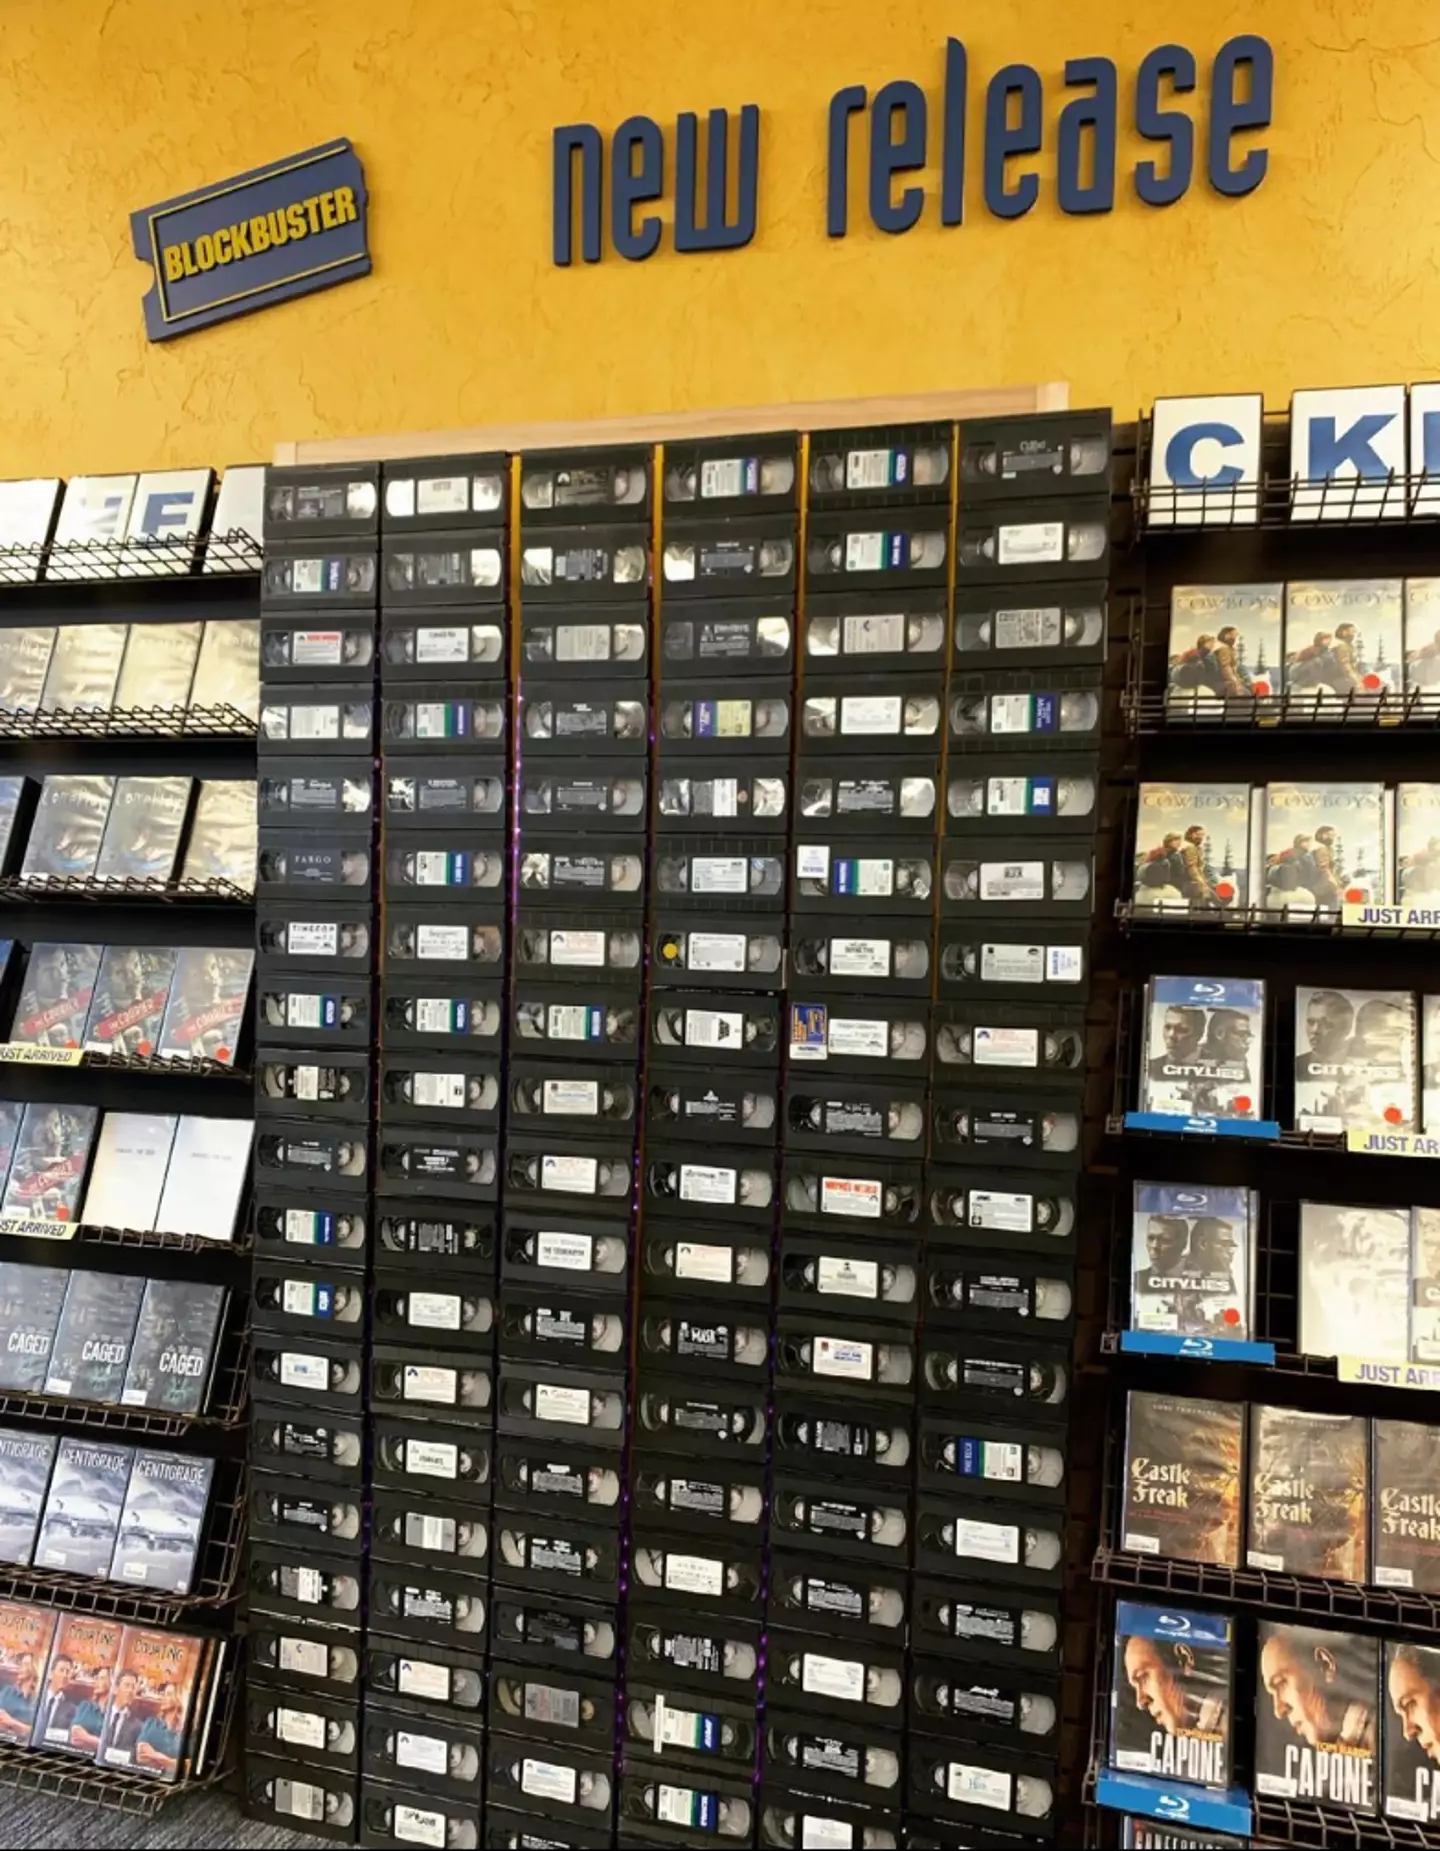 The last remaining Blockbuster in the world has remained pretty much exactly the same since the 1990s.